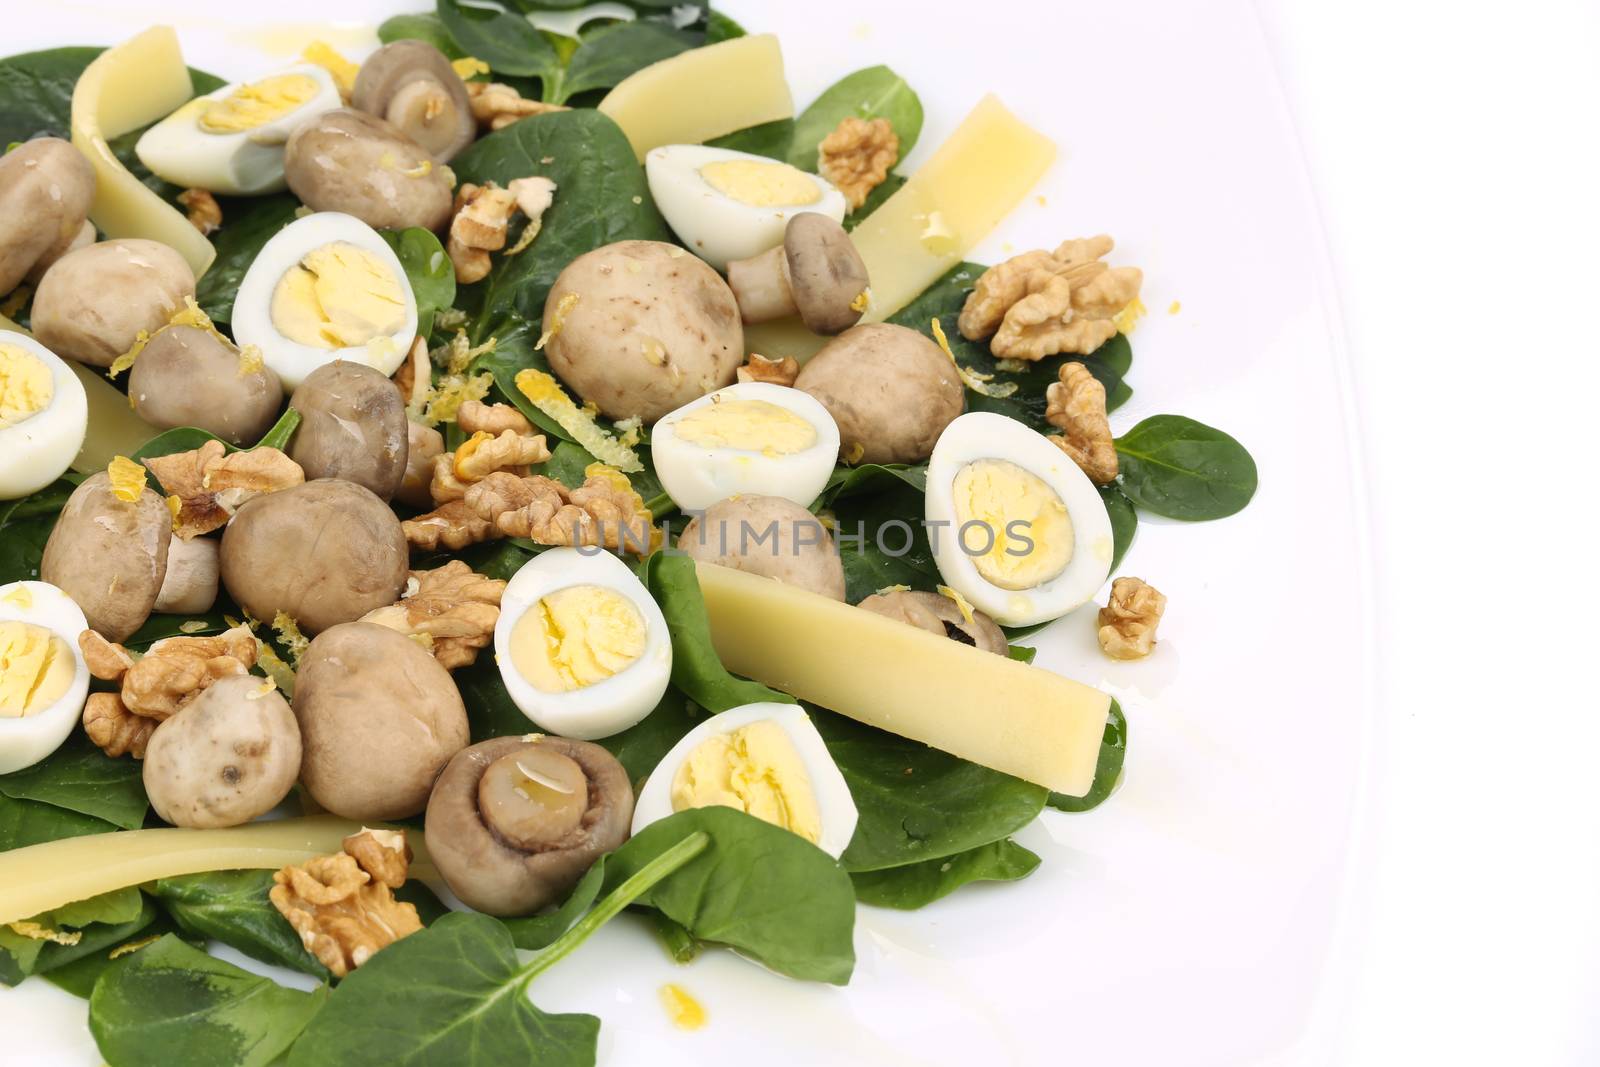 Mushroom salad with walnuts and parmesan. Isolated on a white background.